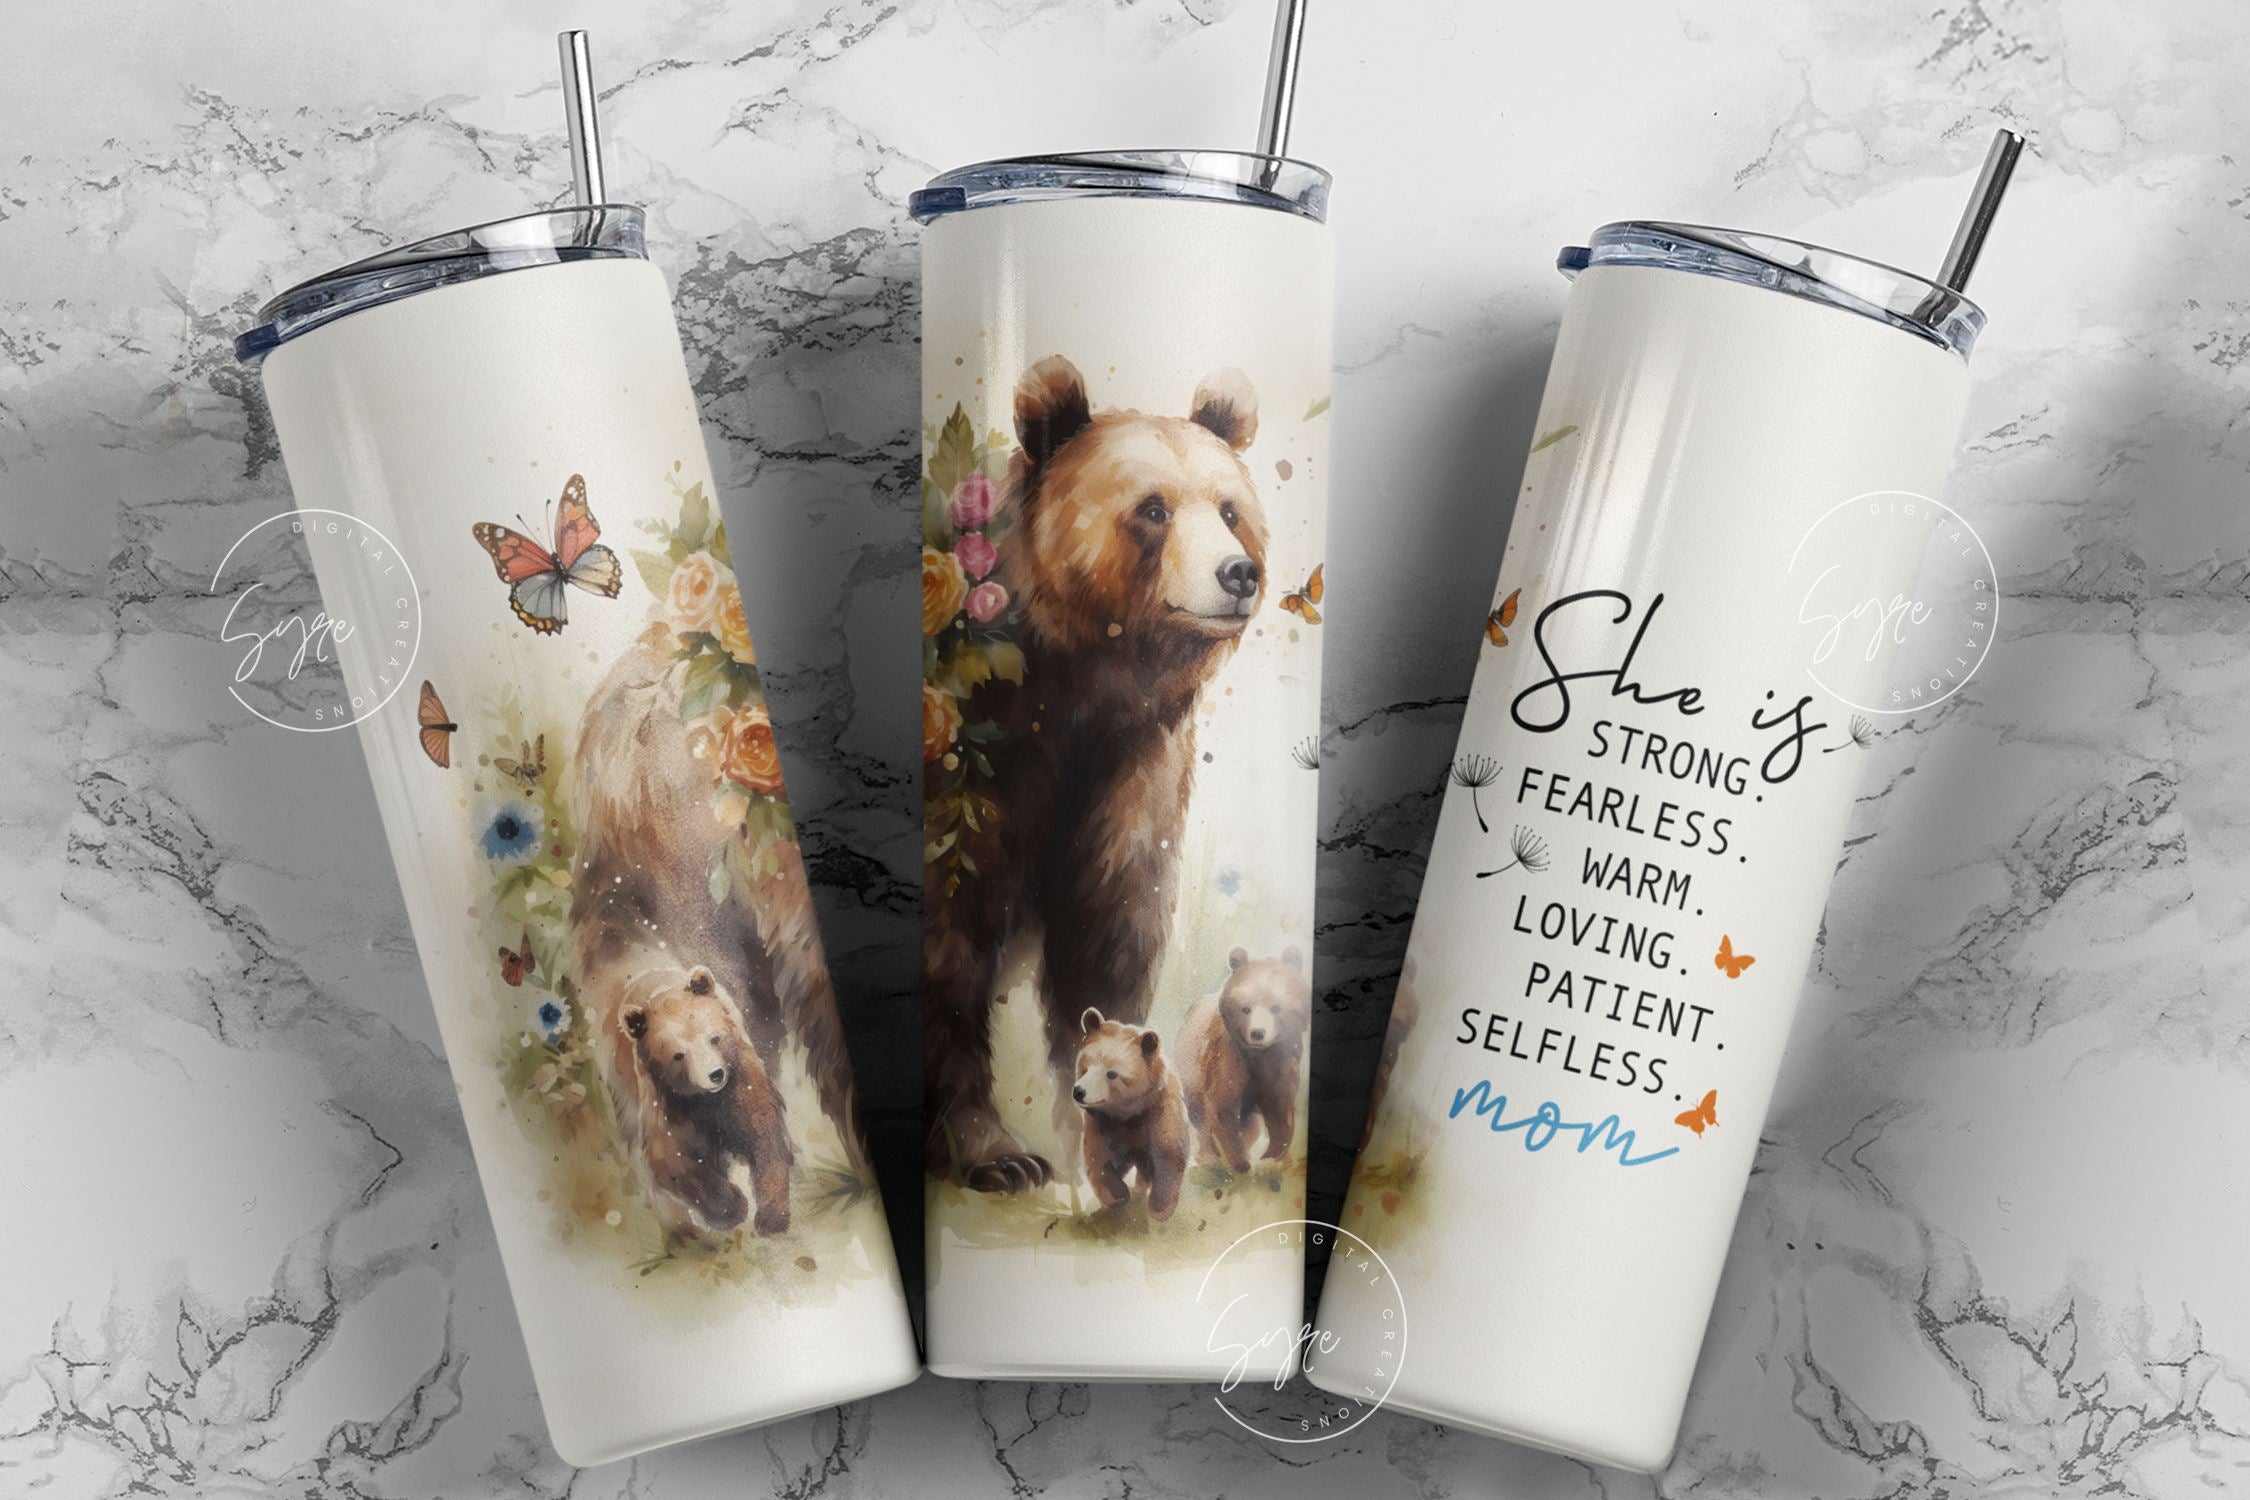 Mama Bear - Personalized Mother's Day Mother Tumbler